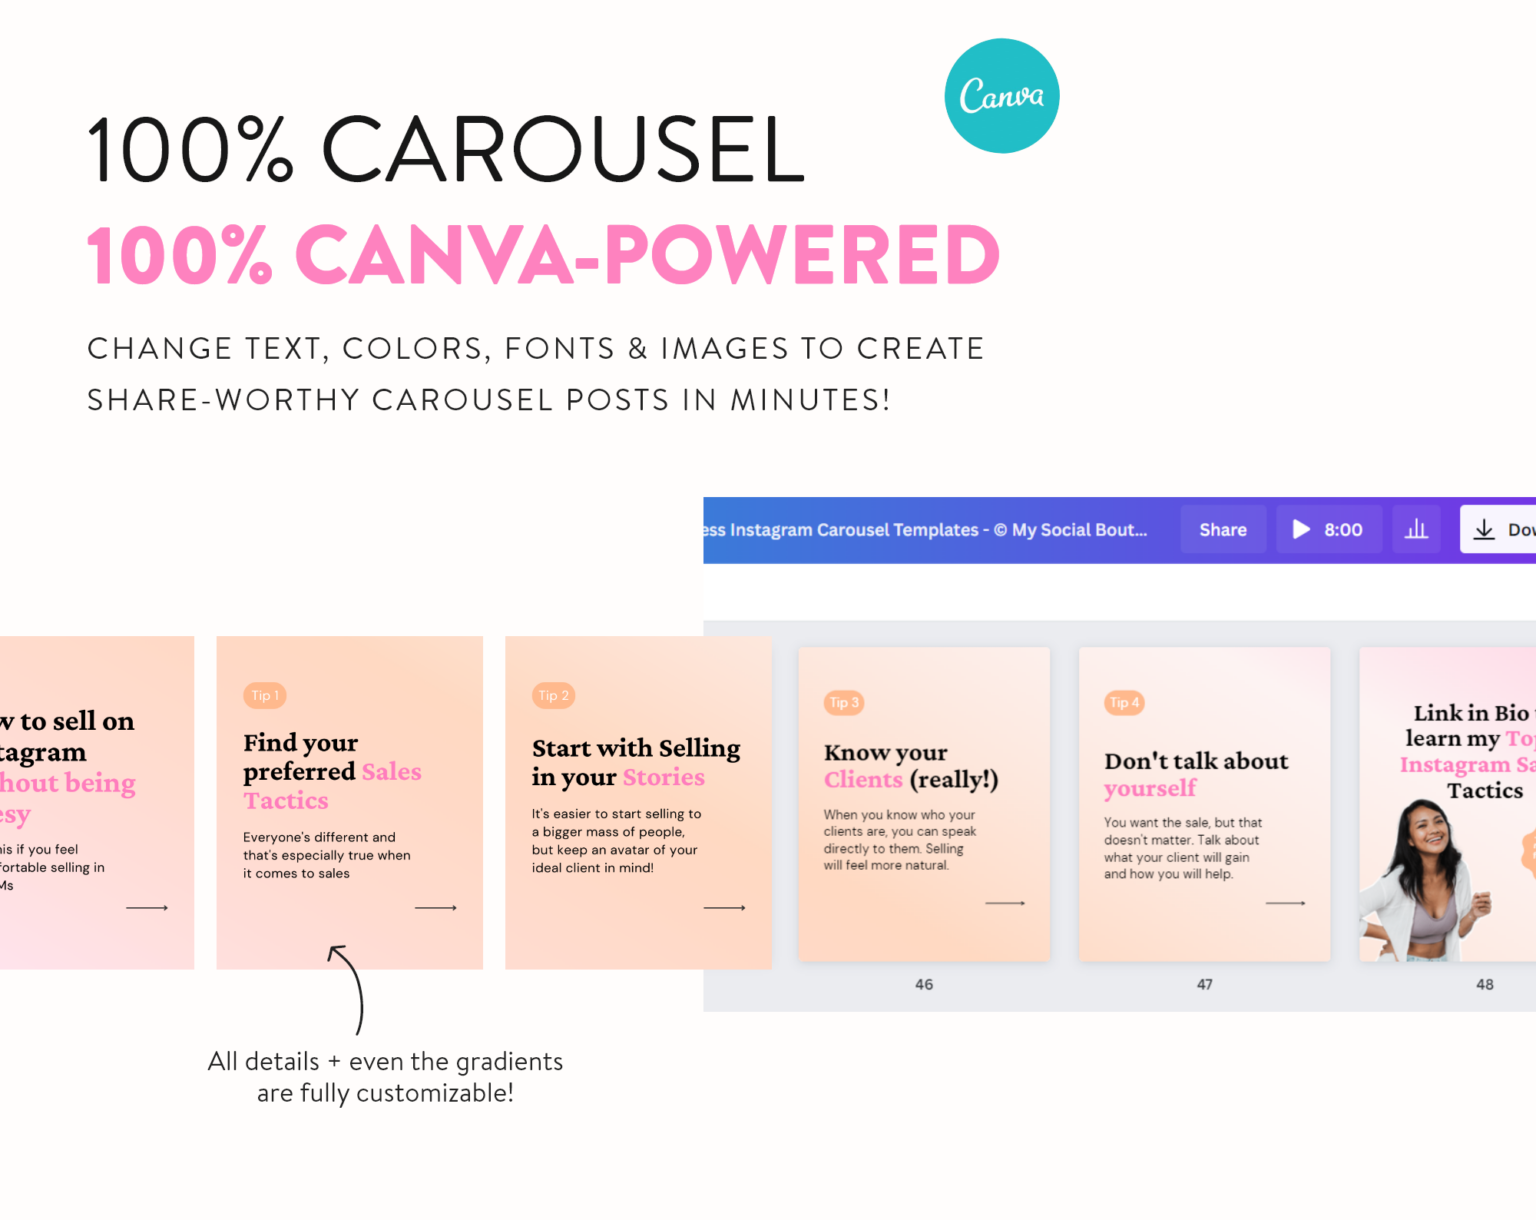 seamlessn-instagram-engagement-carousel-templates-for-canva-power-8